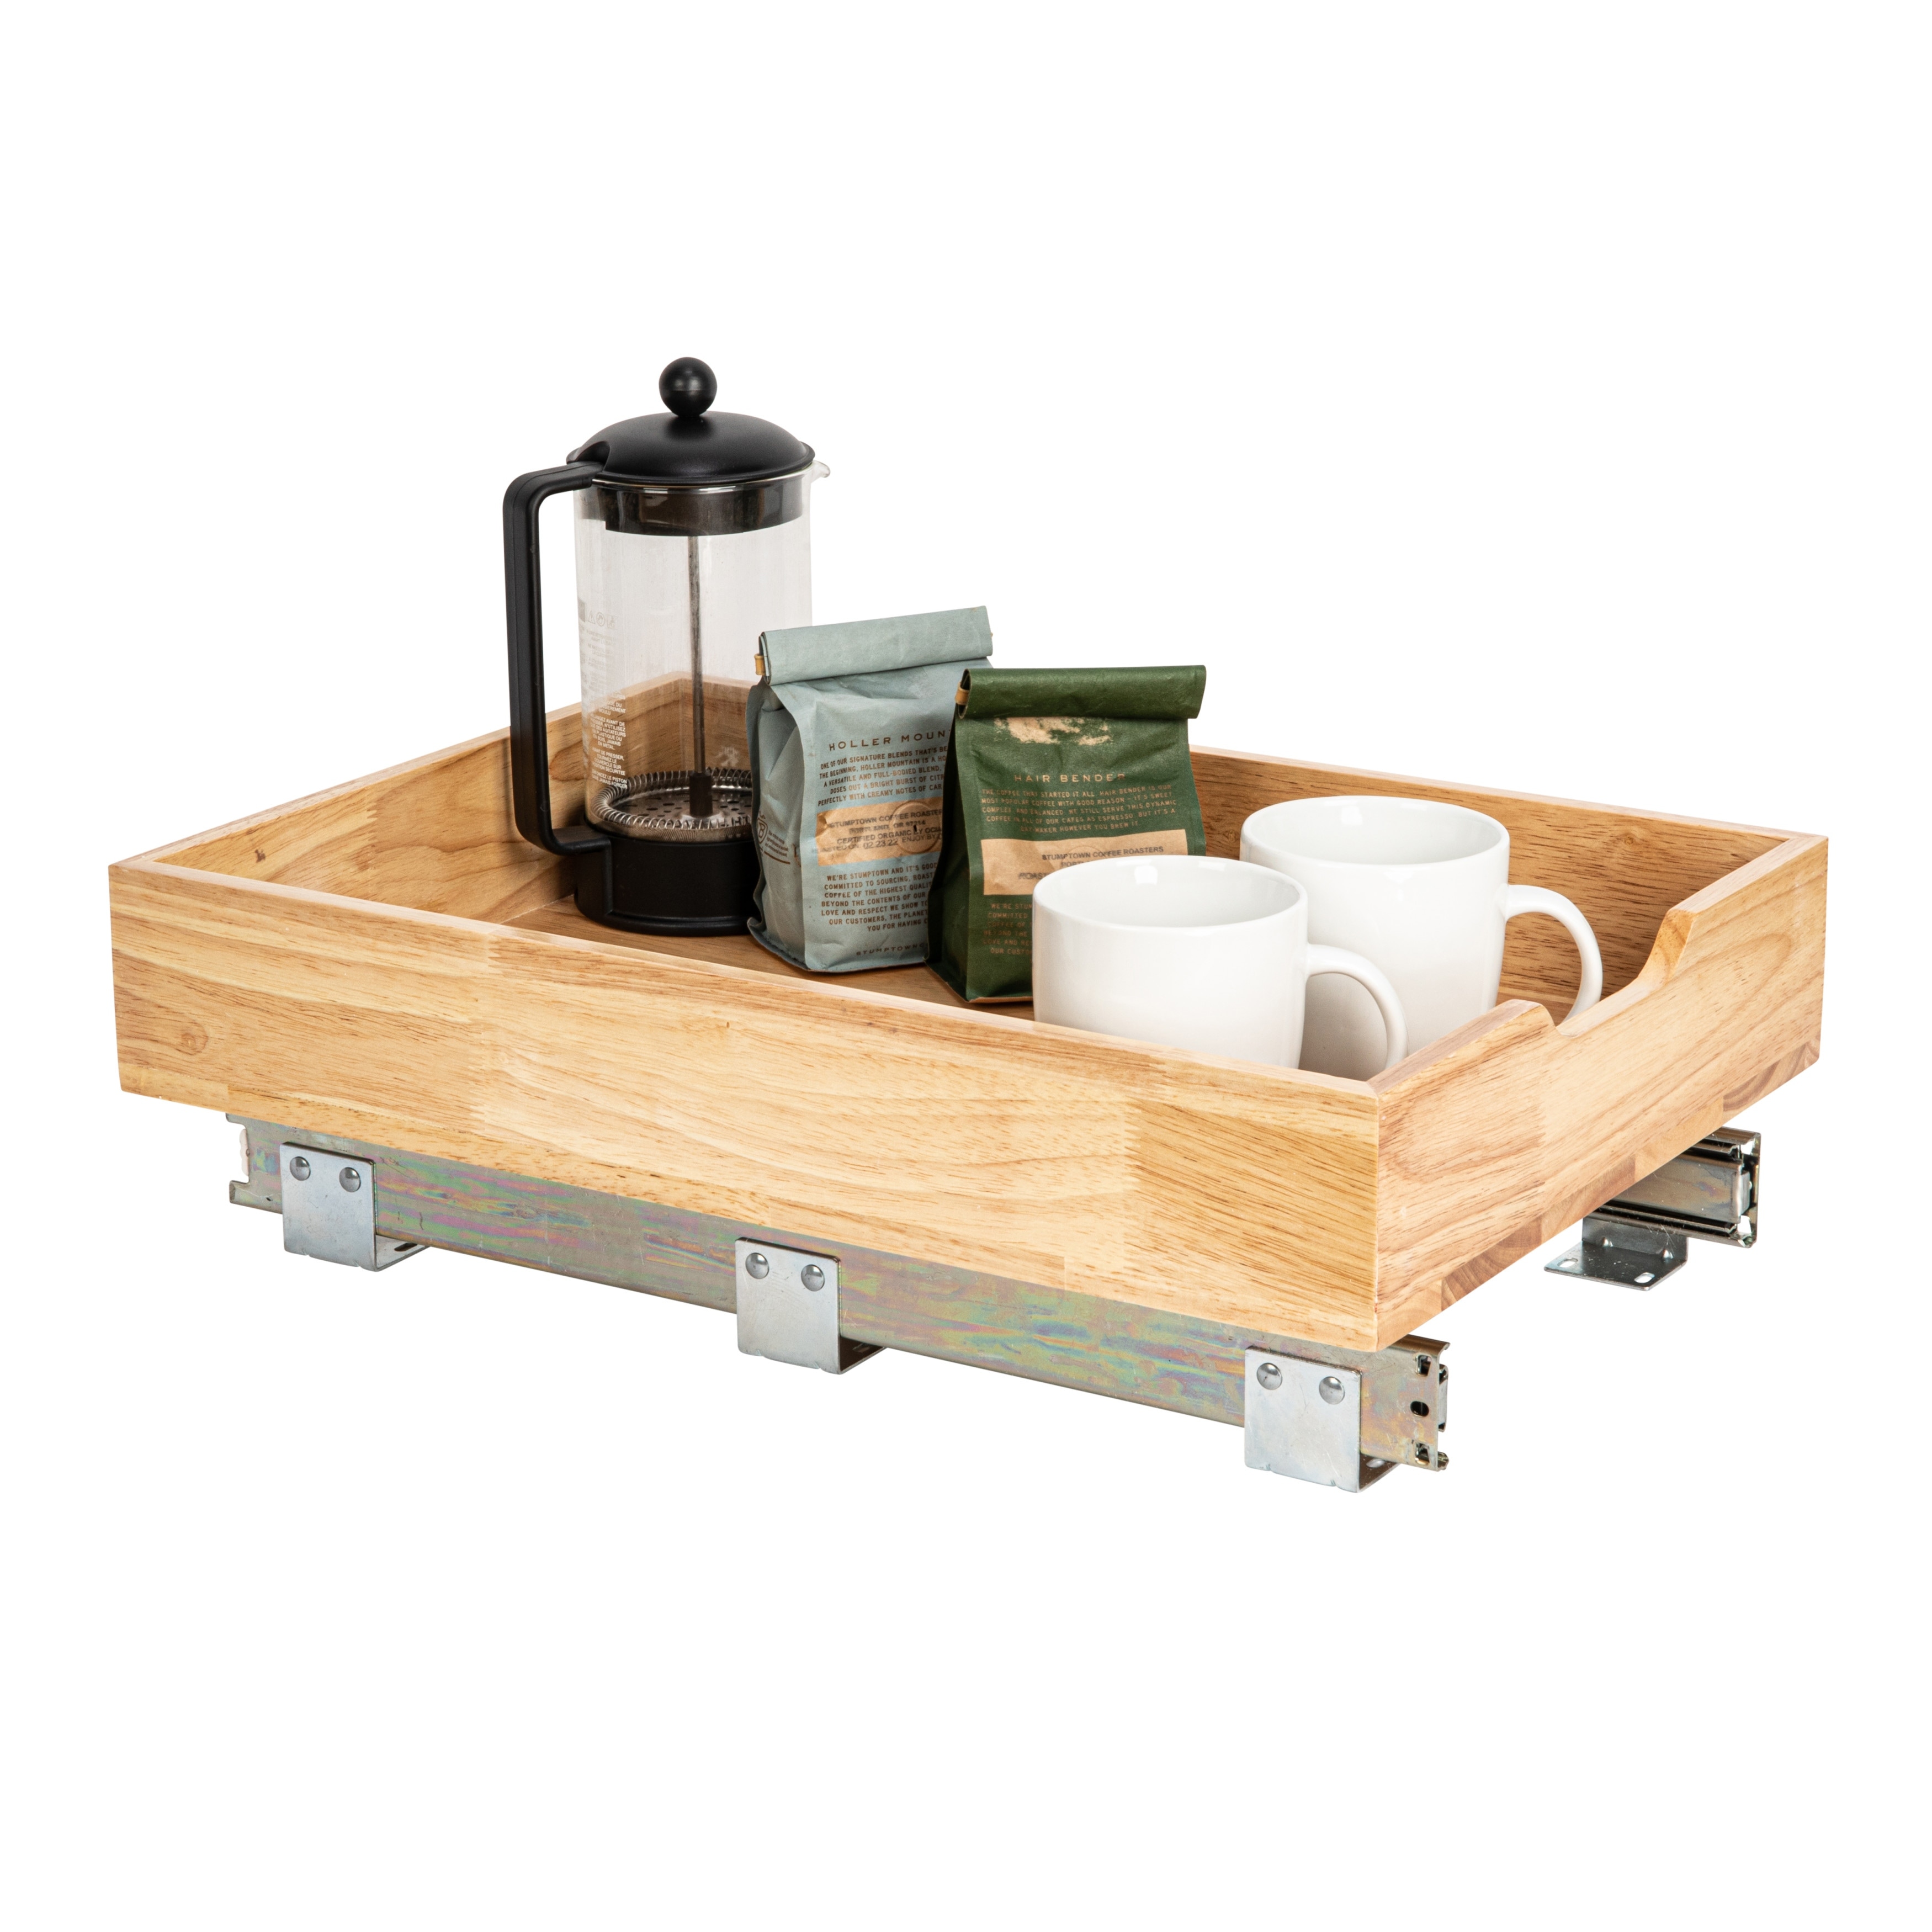 https://ak1.ostkcdn.com/images/products/is/images/direct/fa0fafbb17e246ad894a9709a7dcc747ef88c1d5/Household-Essentials-Glidez-Wood-1-Tier-Sliding-Cabinet-Organizer.jpg